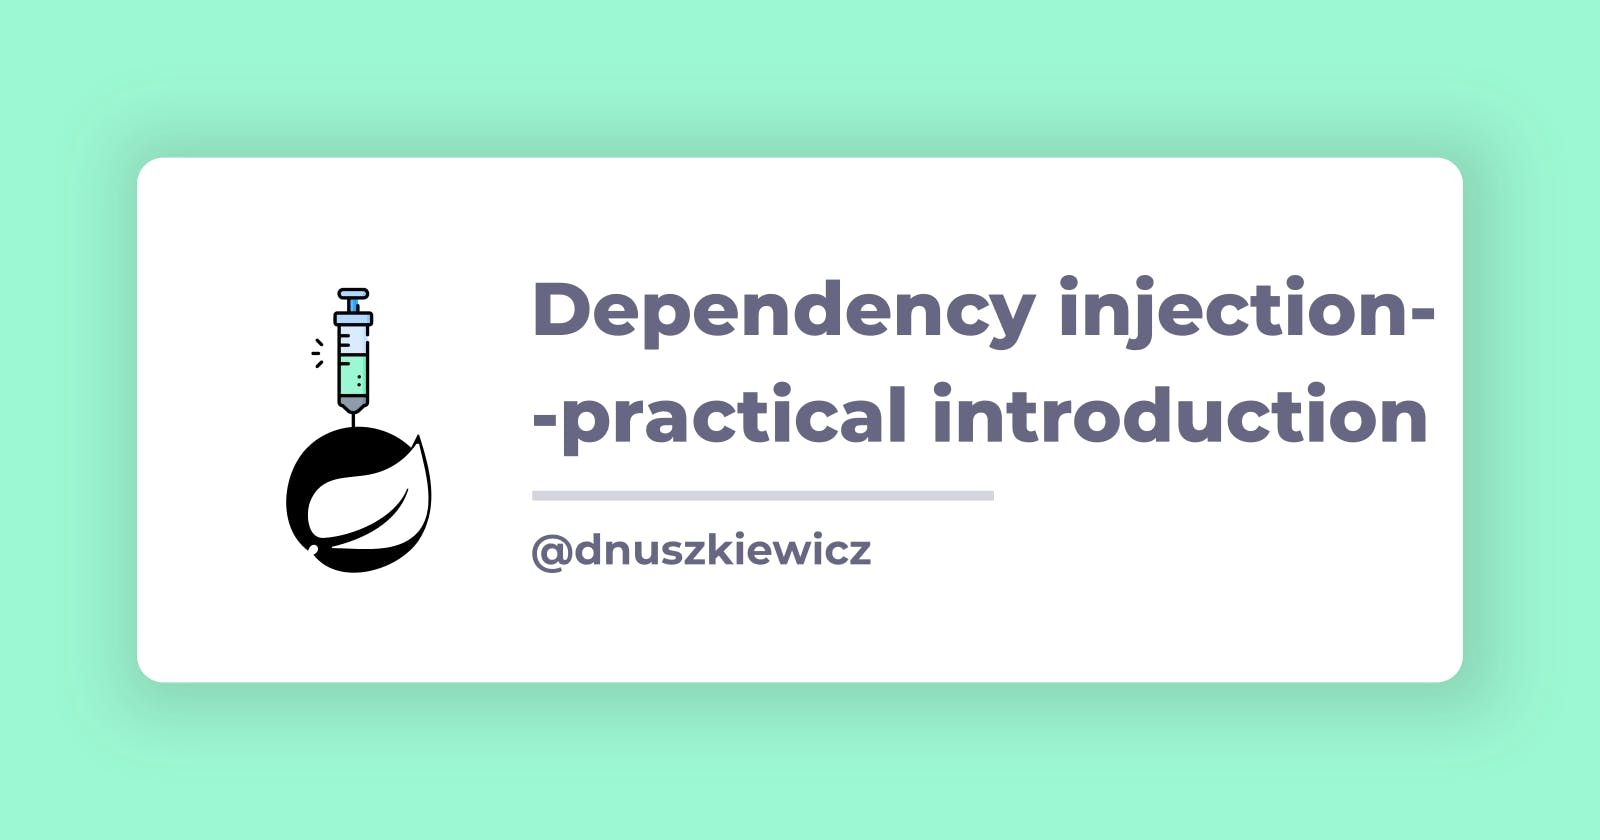 Dependency injection in Spring - practical introduction